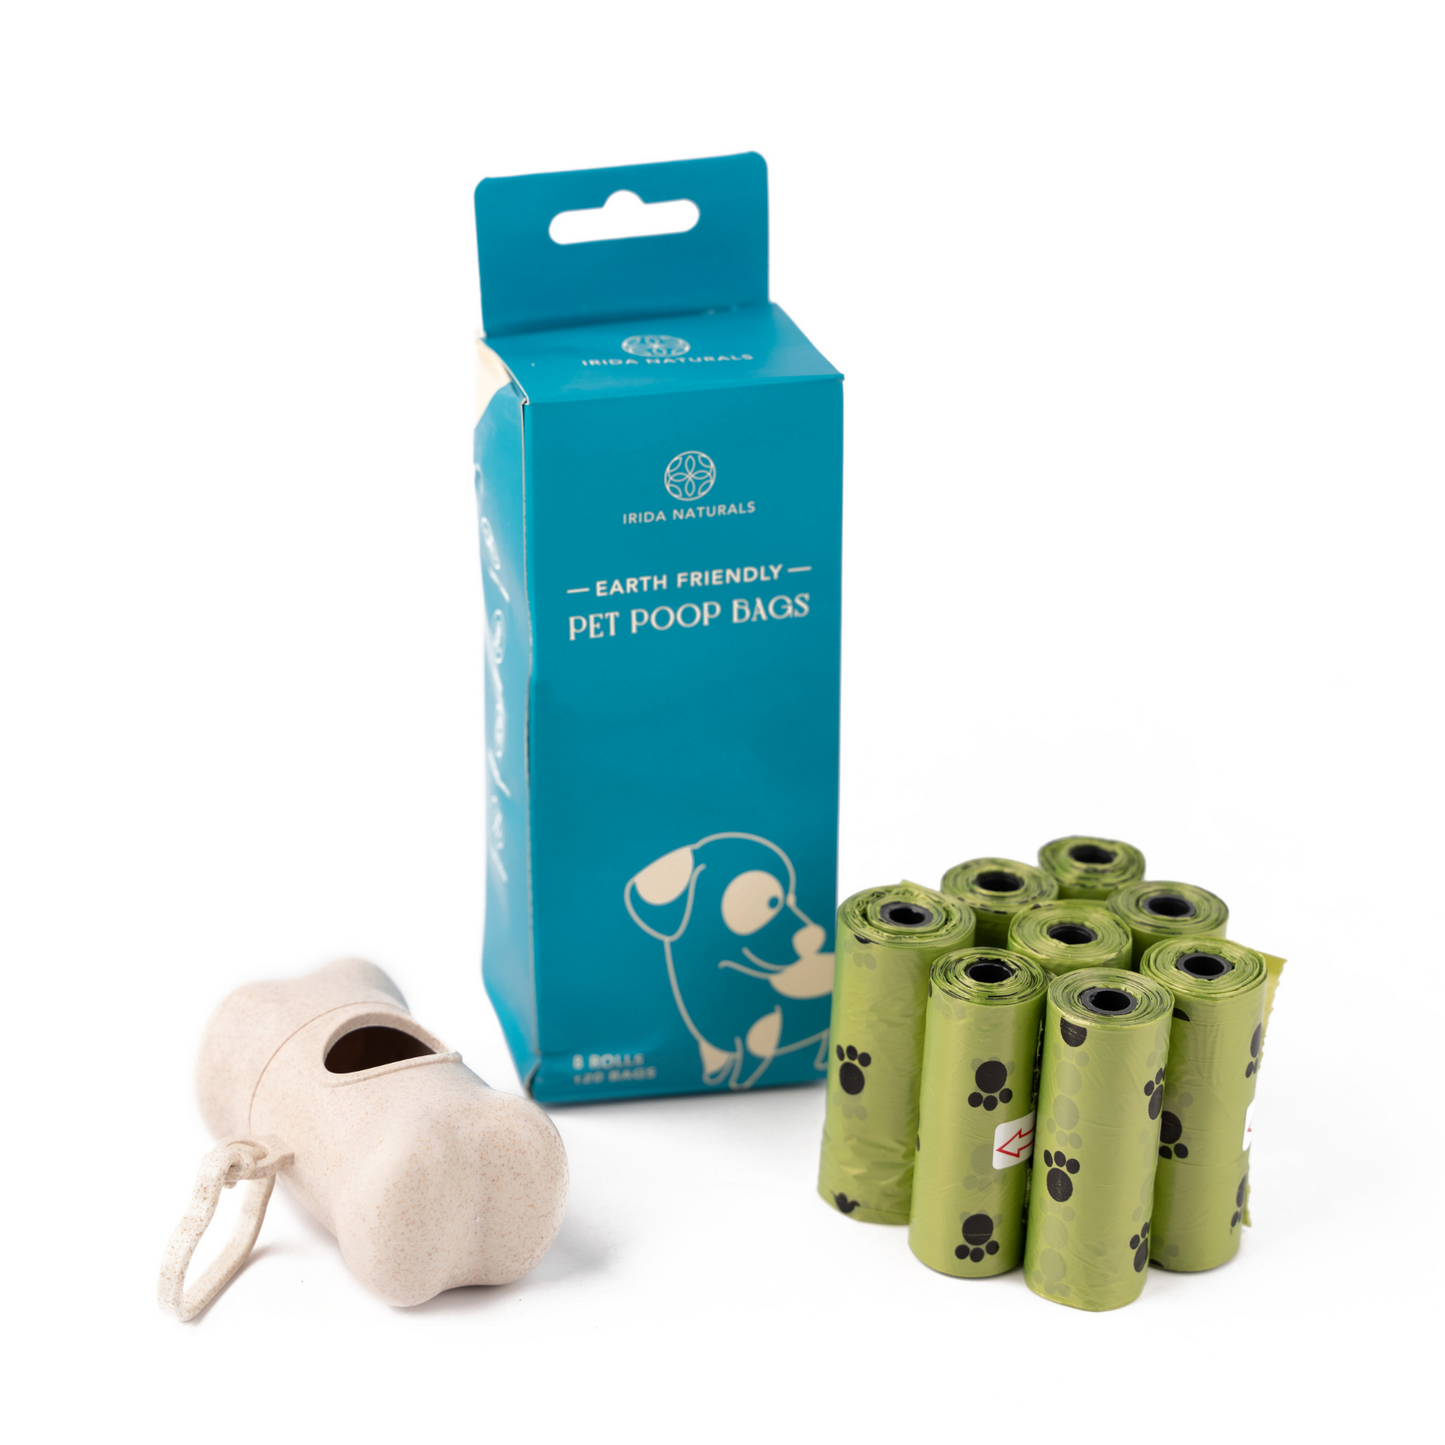 Irida Naturals Compostable Pet Poop Bags 120 Bags with a Wheat straw dispenser